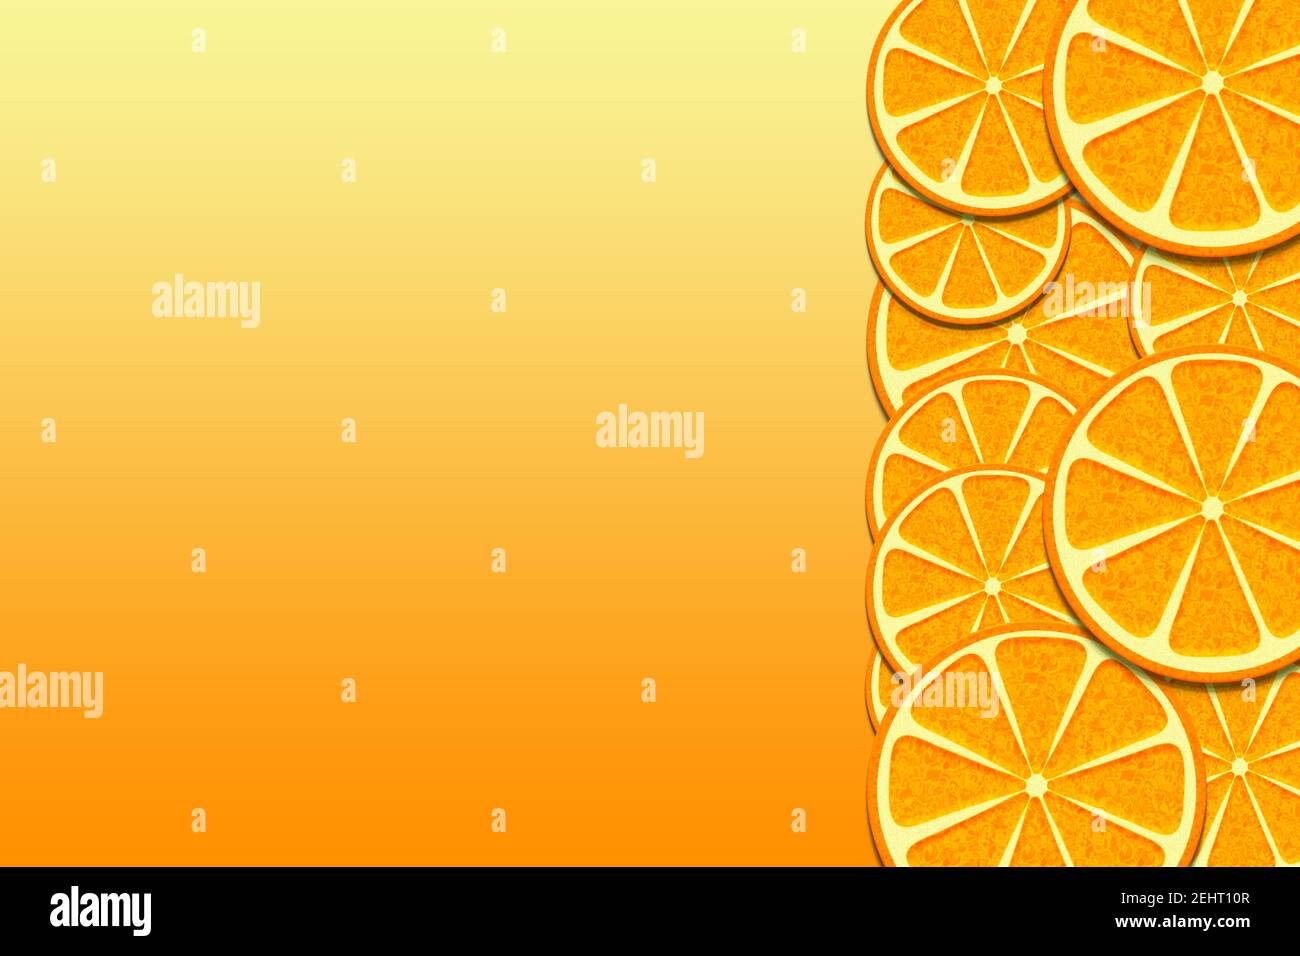 3d background border illustration of slices of fresh orange with space for text Stock Photo